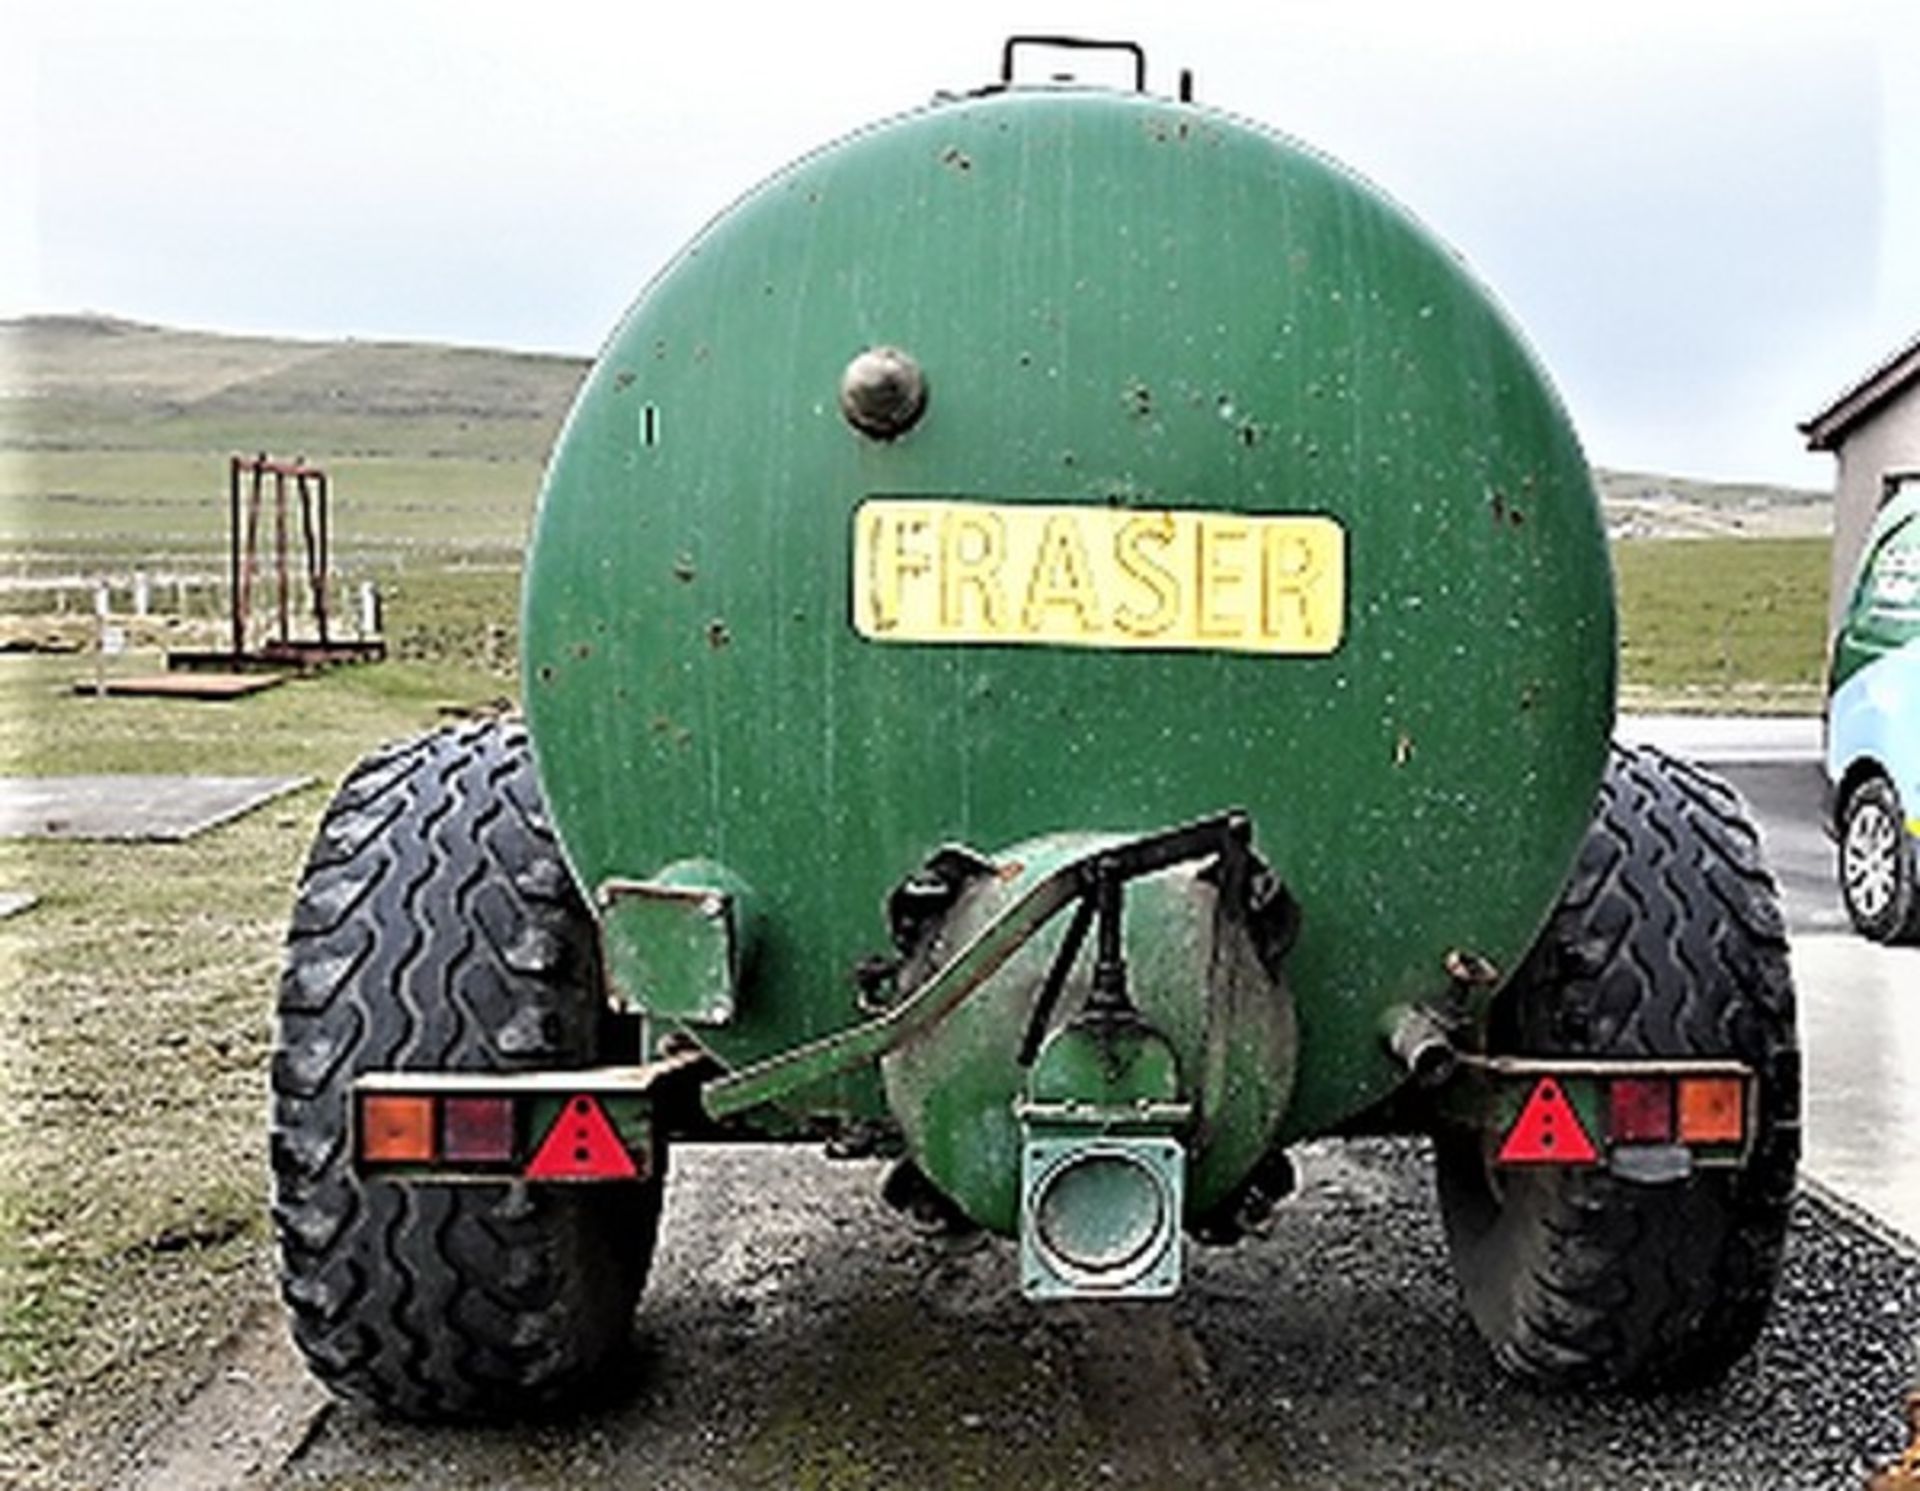 1994 FRASER SB7000 slurry tanker s/n1484. Sold from Errol auction site. Viewing and uplift from West